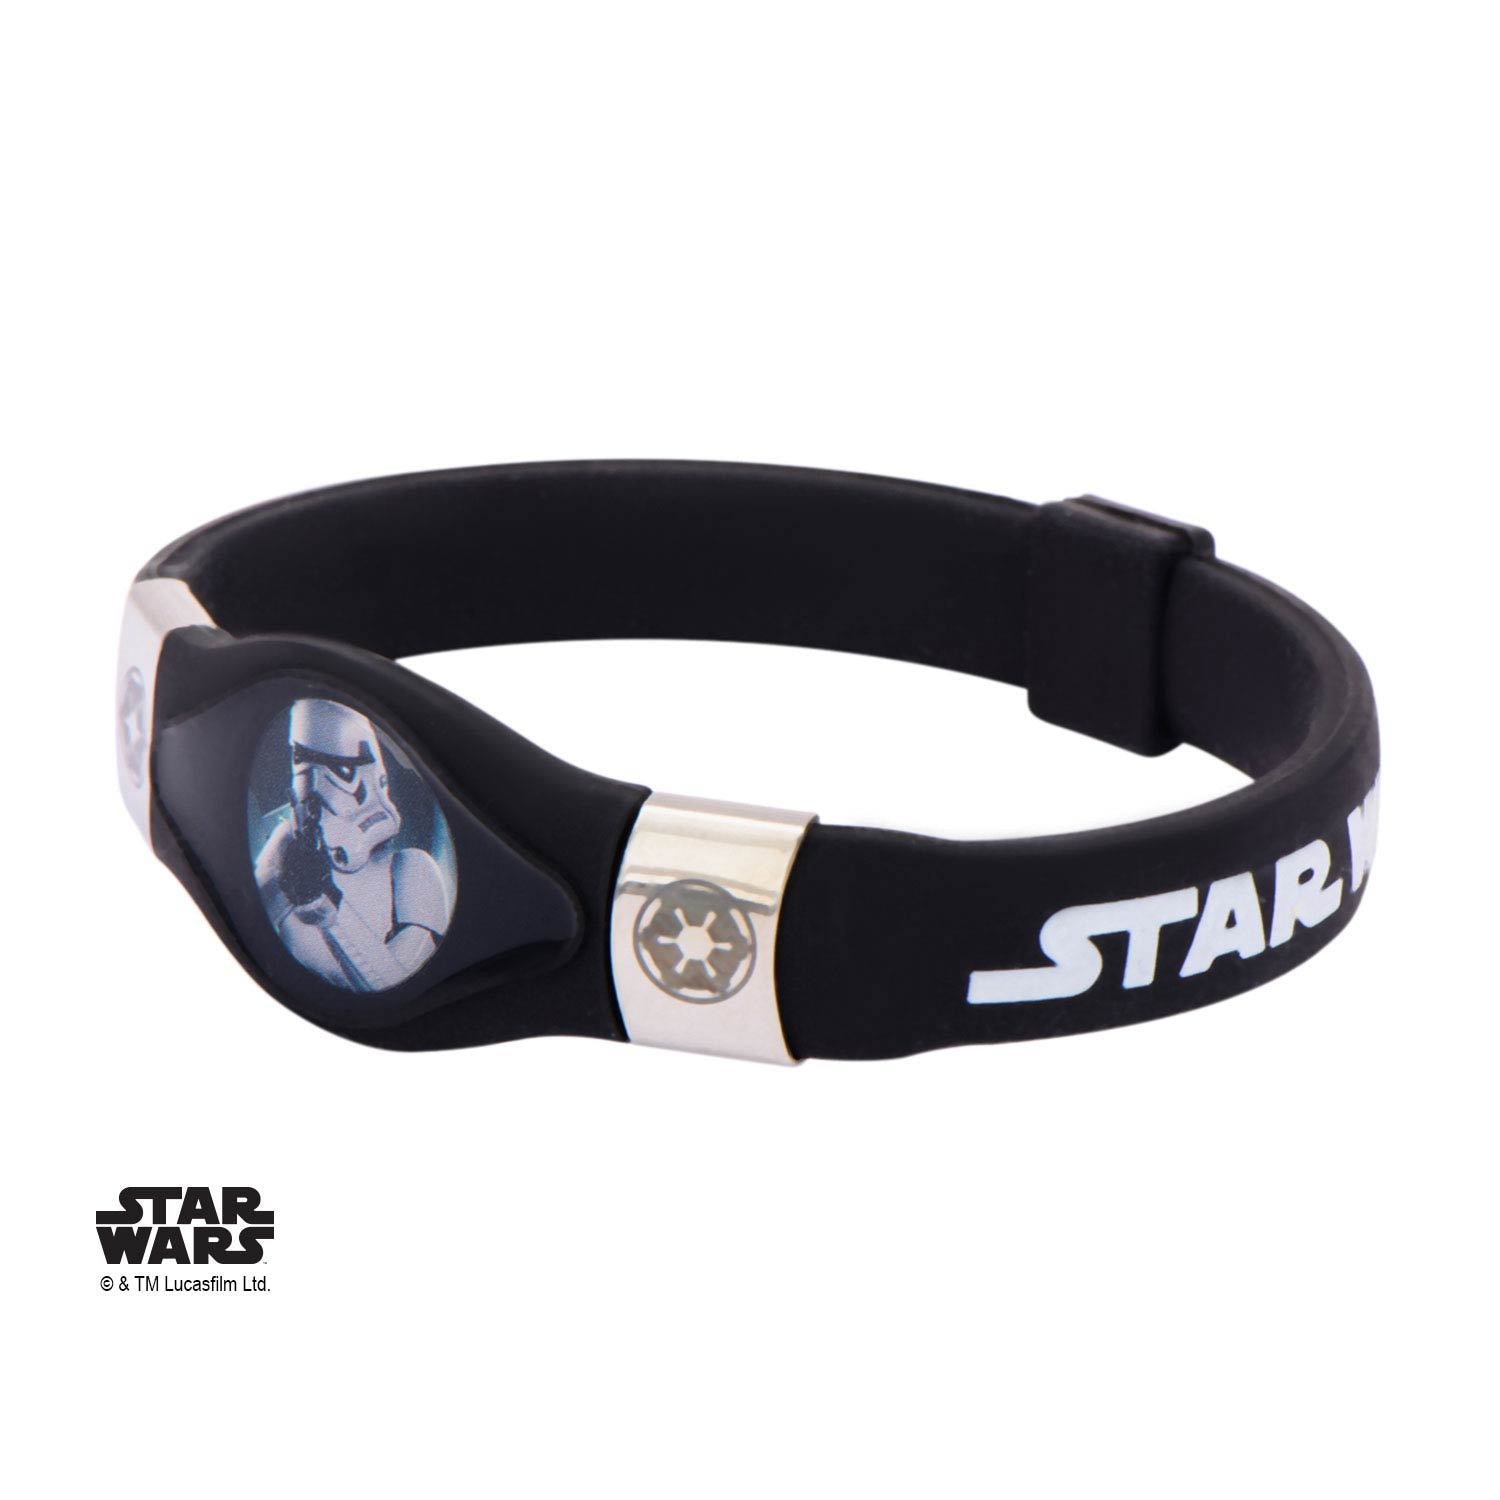 Star Wars Stormtrooper and Galactic Empire Symbol Kids' Silicone Bracelet